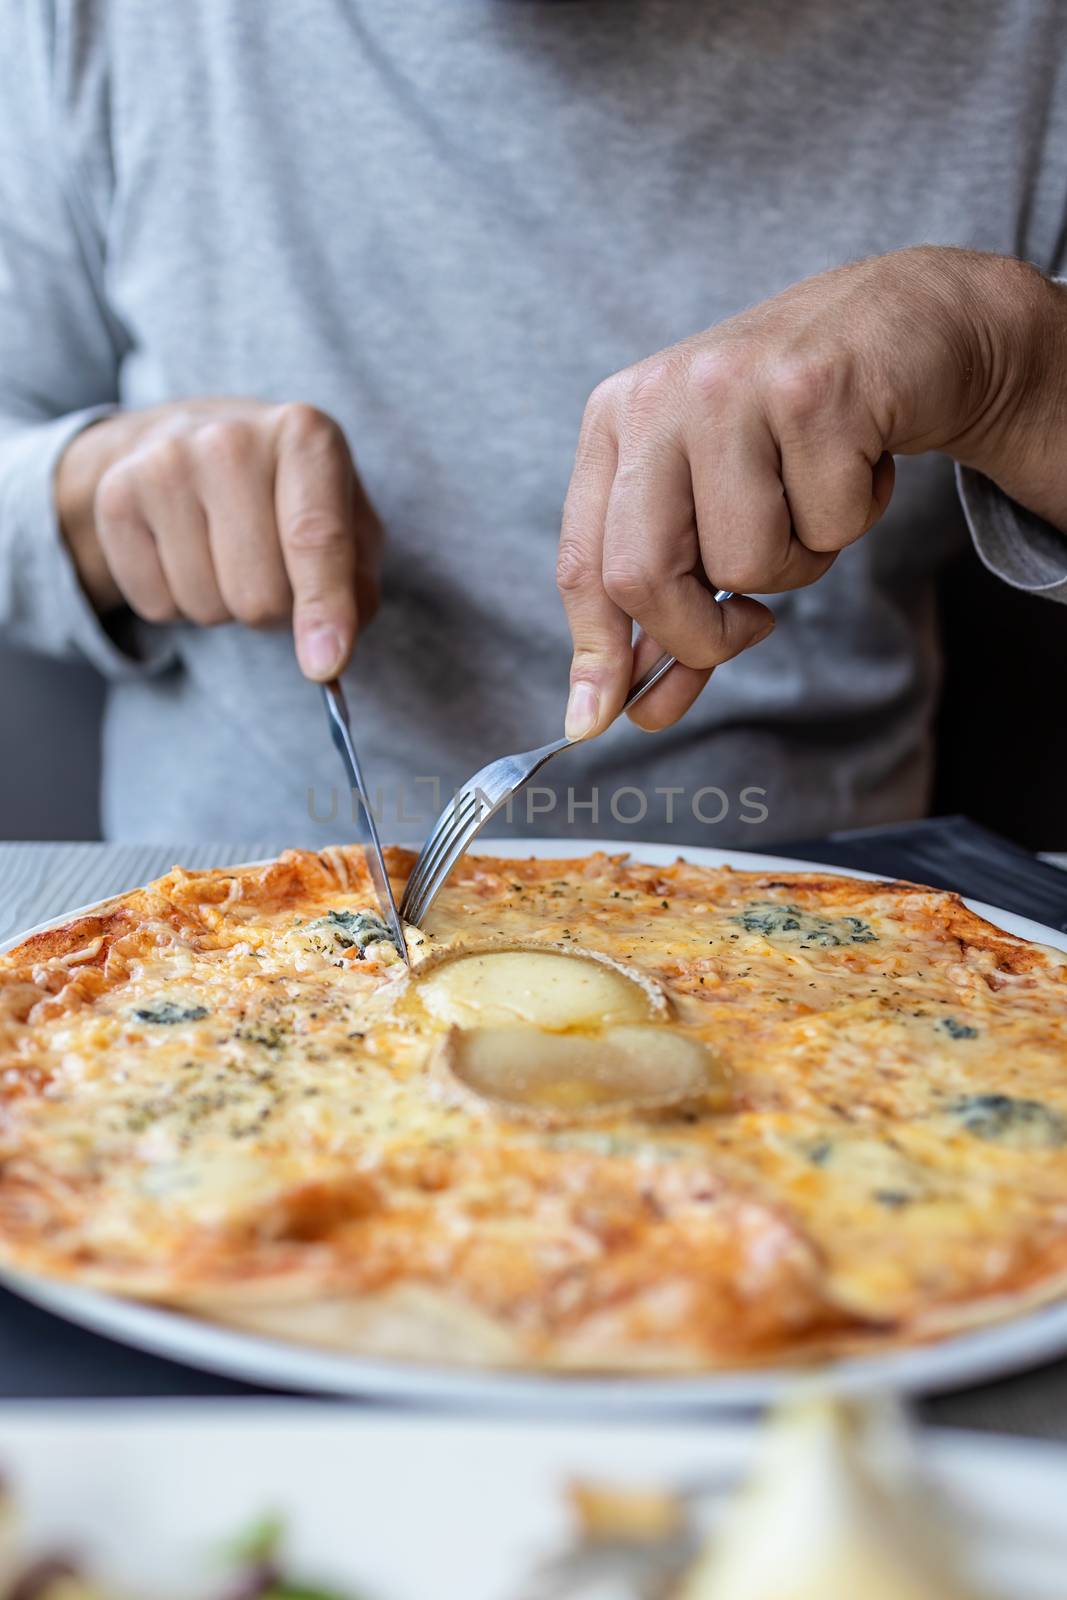 Man eating delicious cheesy pizza in the restaurant with fork and knife by Digoarpi